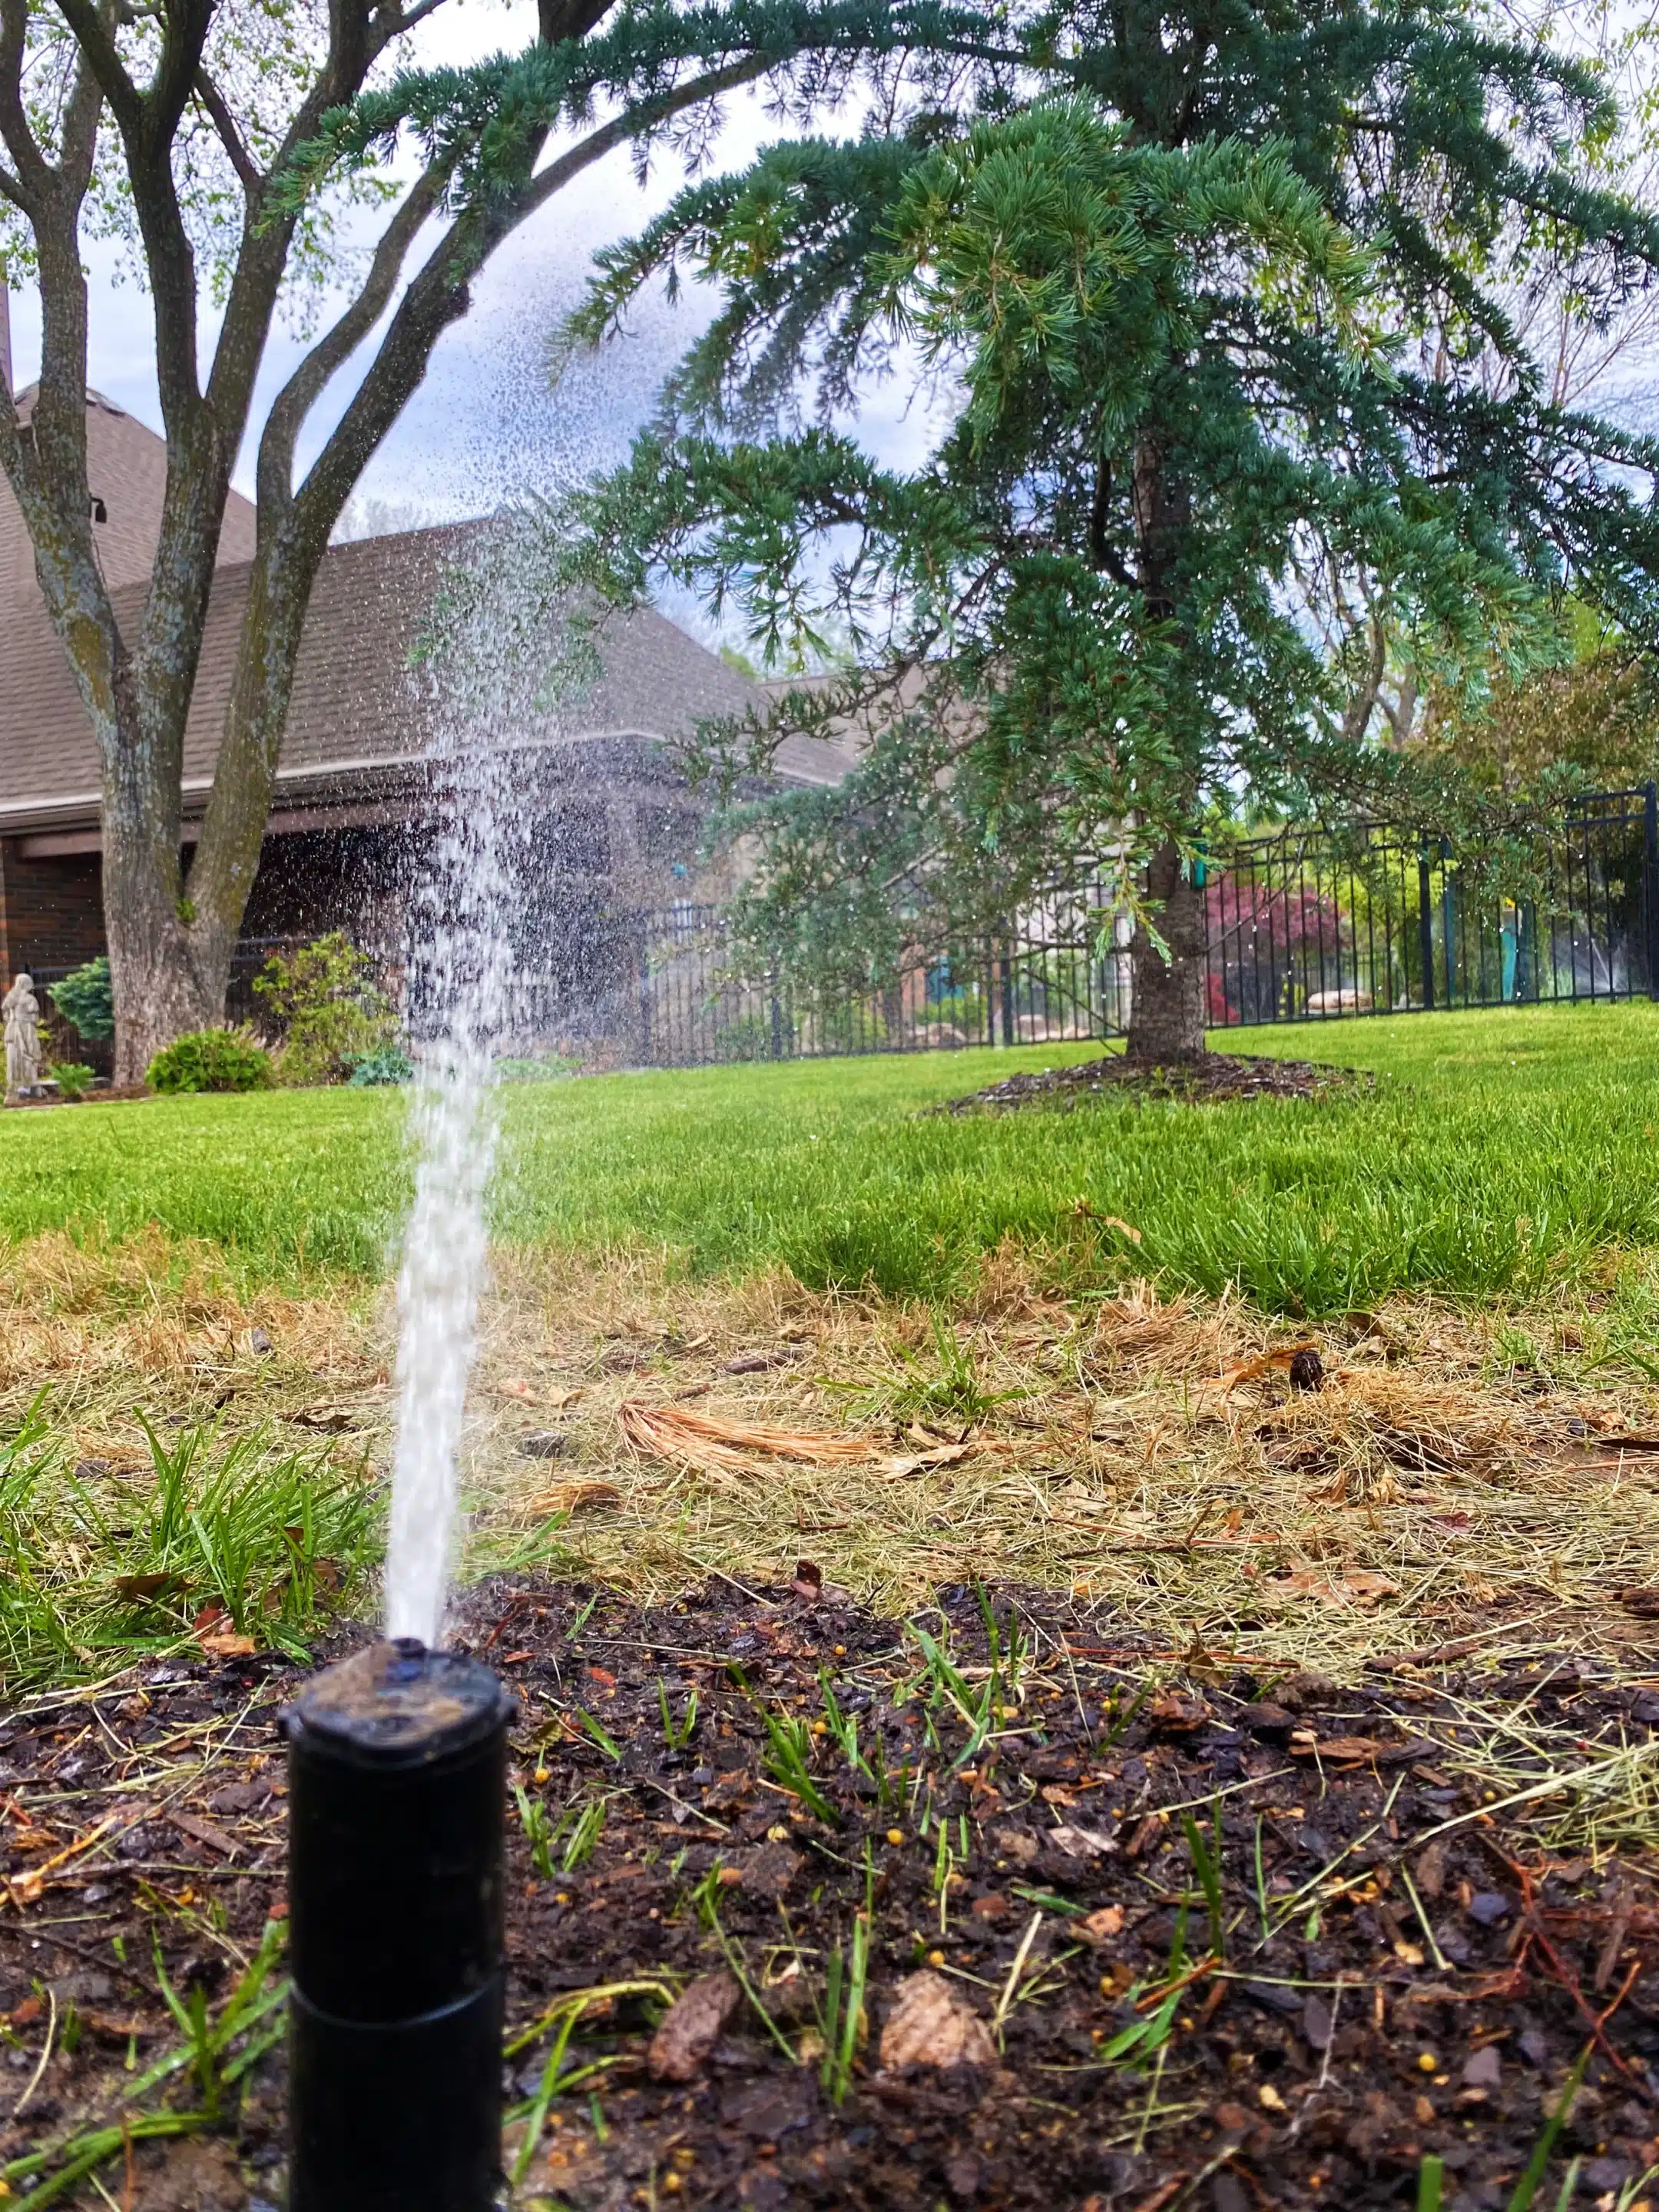 Sprinkler System Repair Tulsa area. Contact us for the best service in Tulsa.